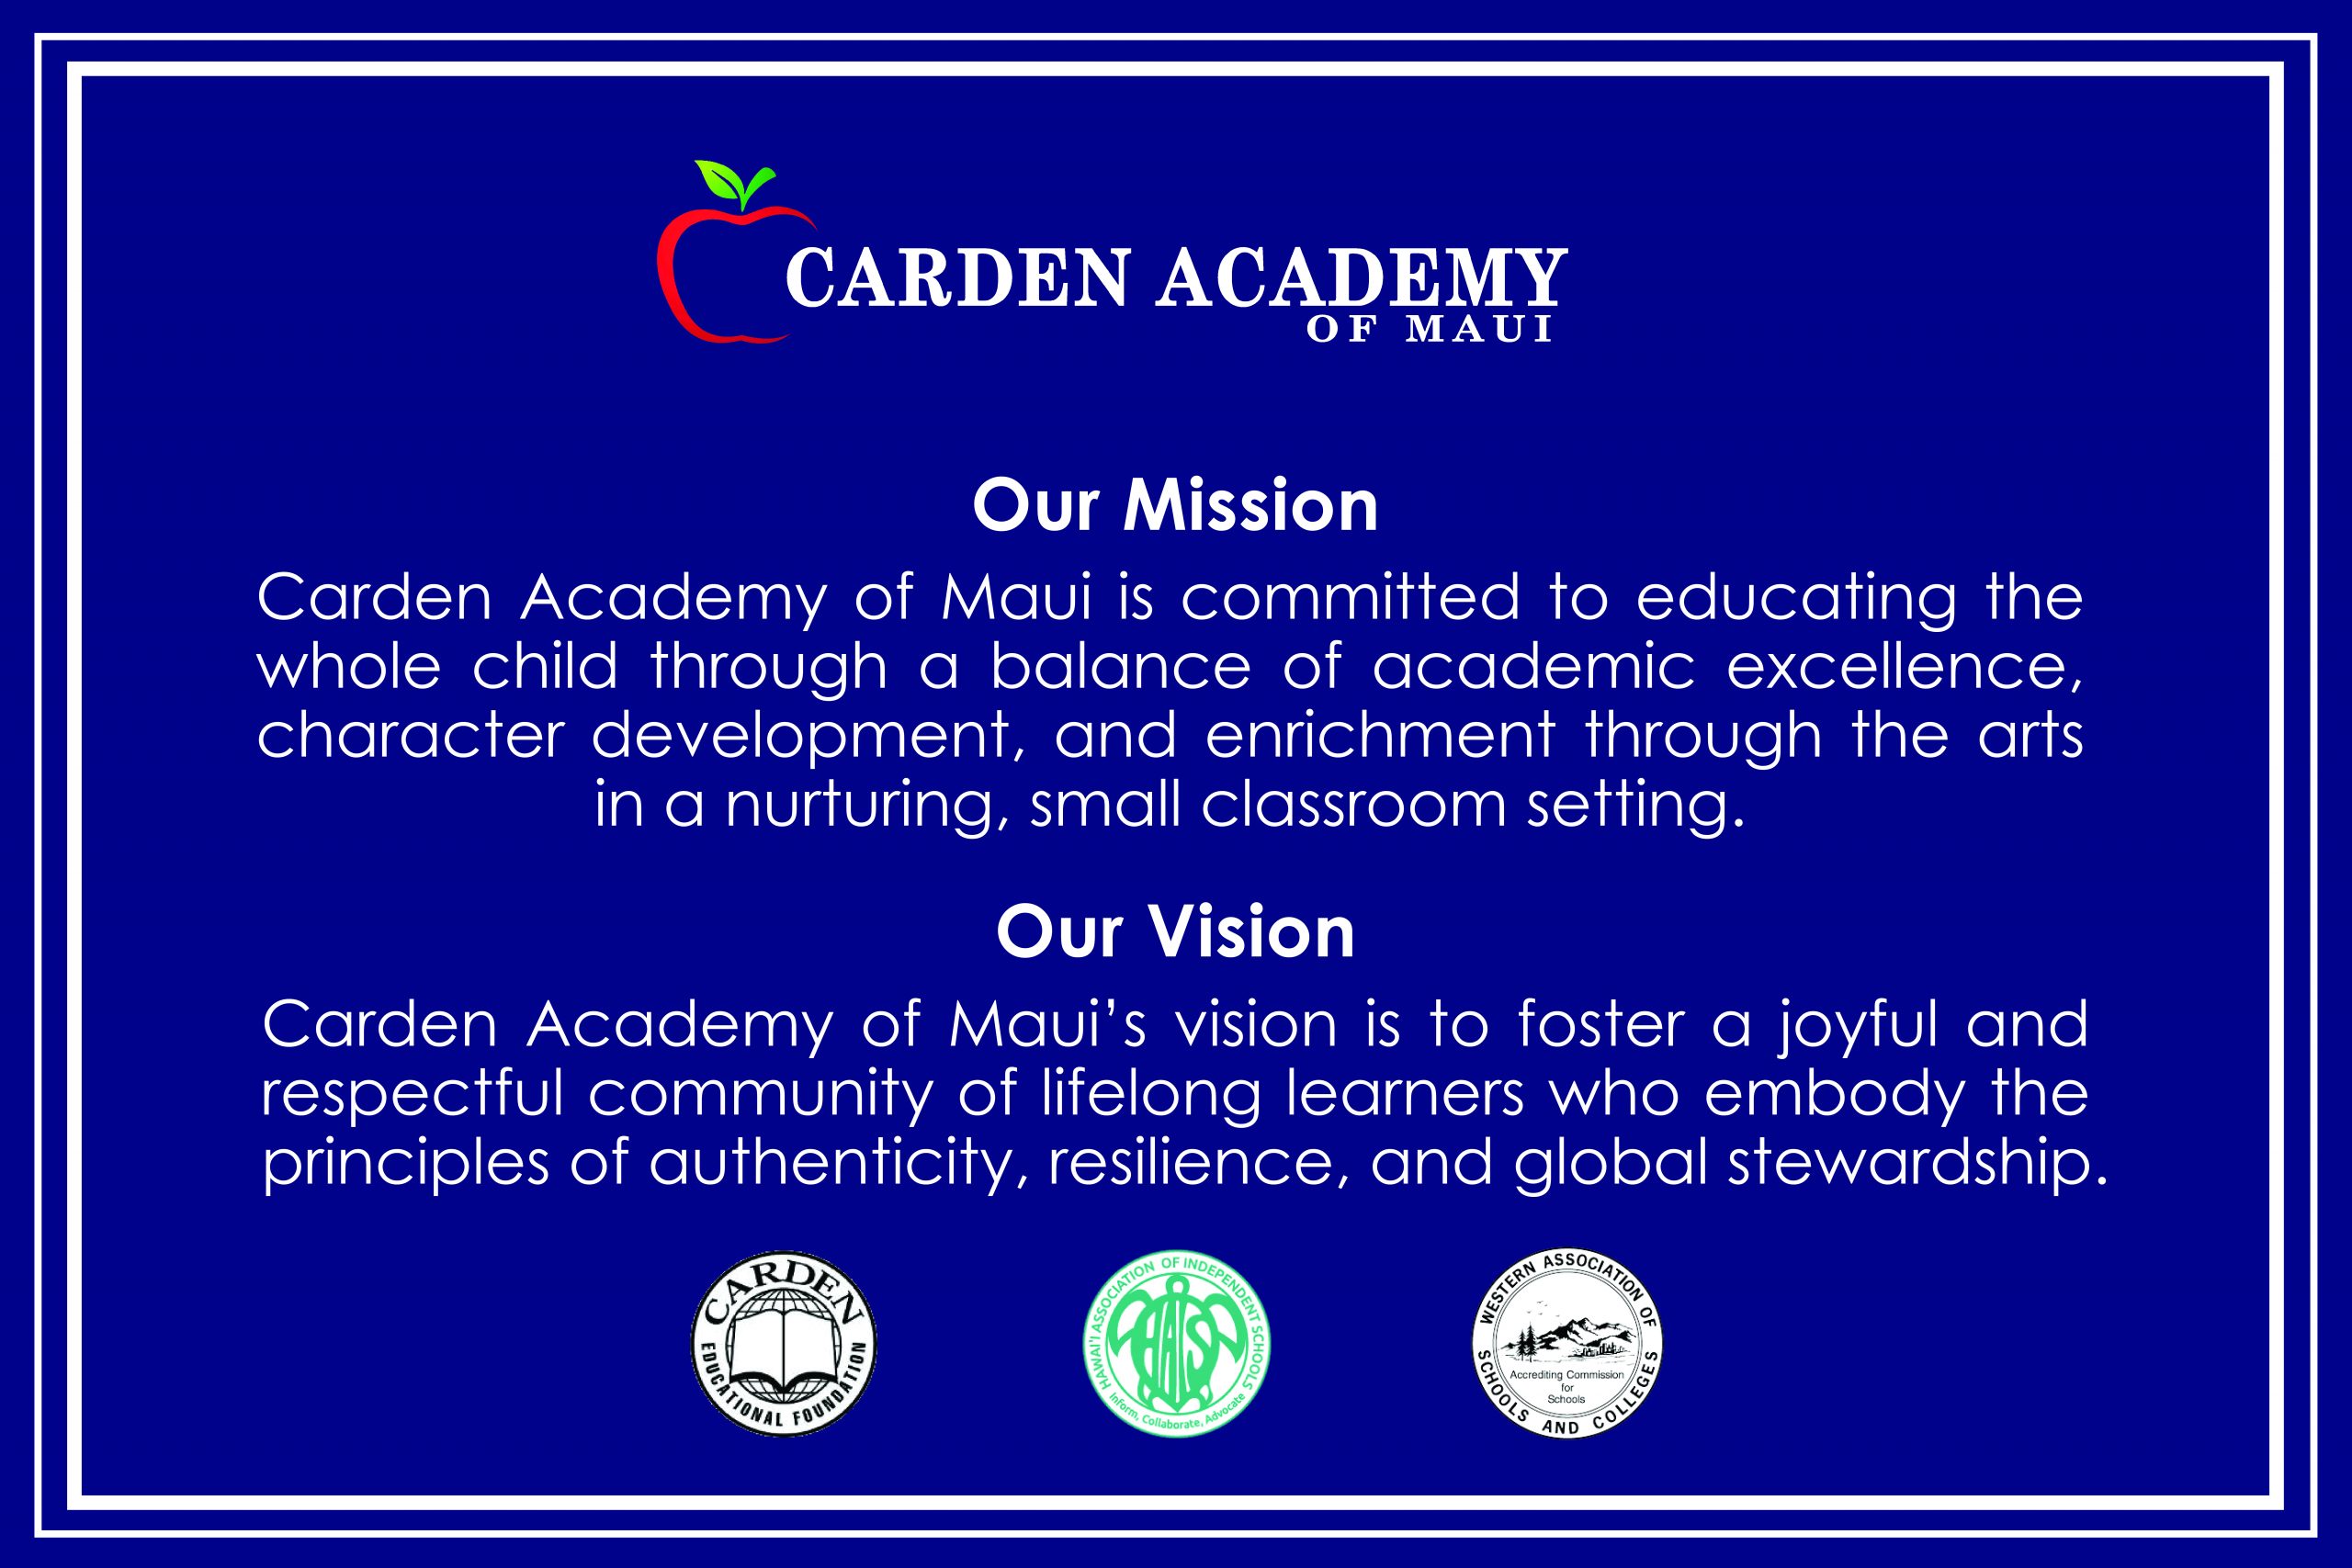 mission-carden-academy-of-maui